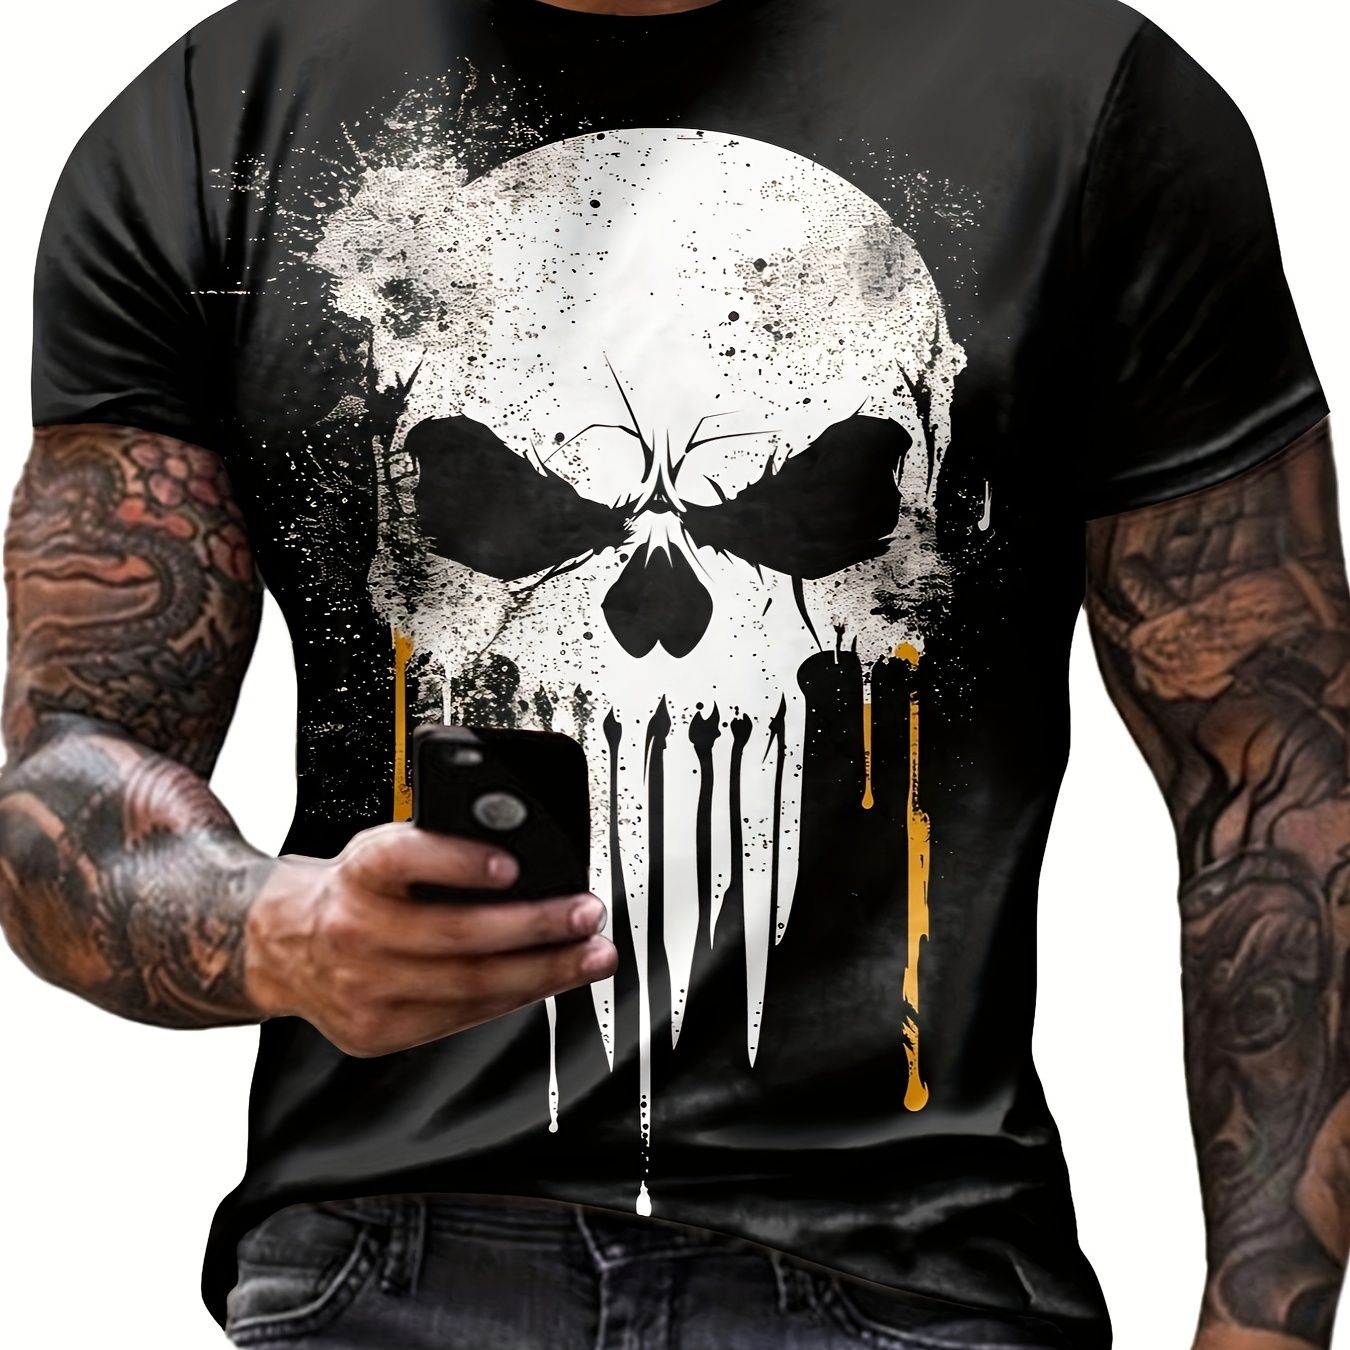 

Men's Skull And Paint Mark Pattern T-shirt, Crew Neck And Short Sleeve Tees For Men, Novel And Cool Tops For Summer Outdoors Wear